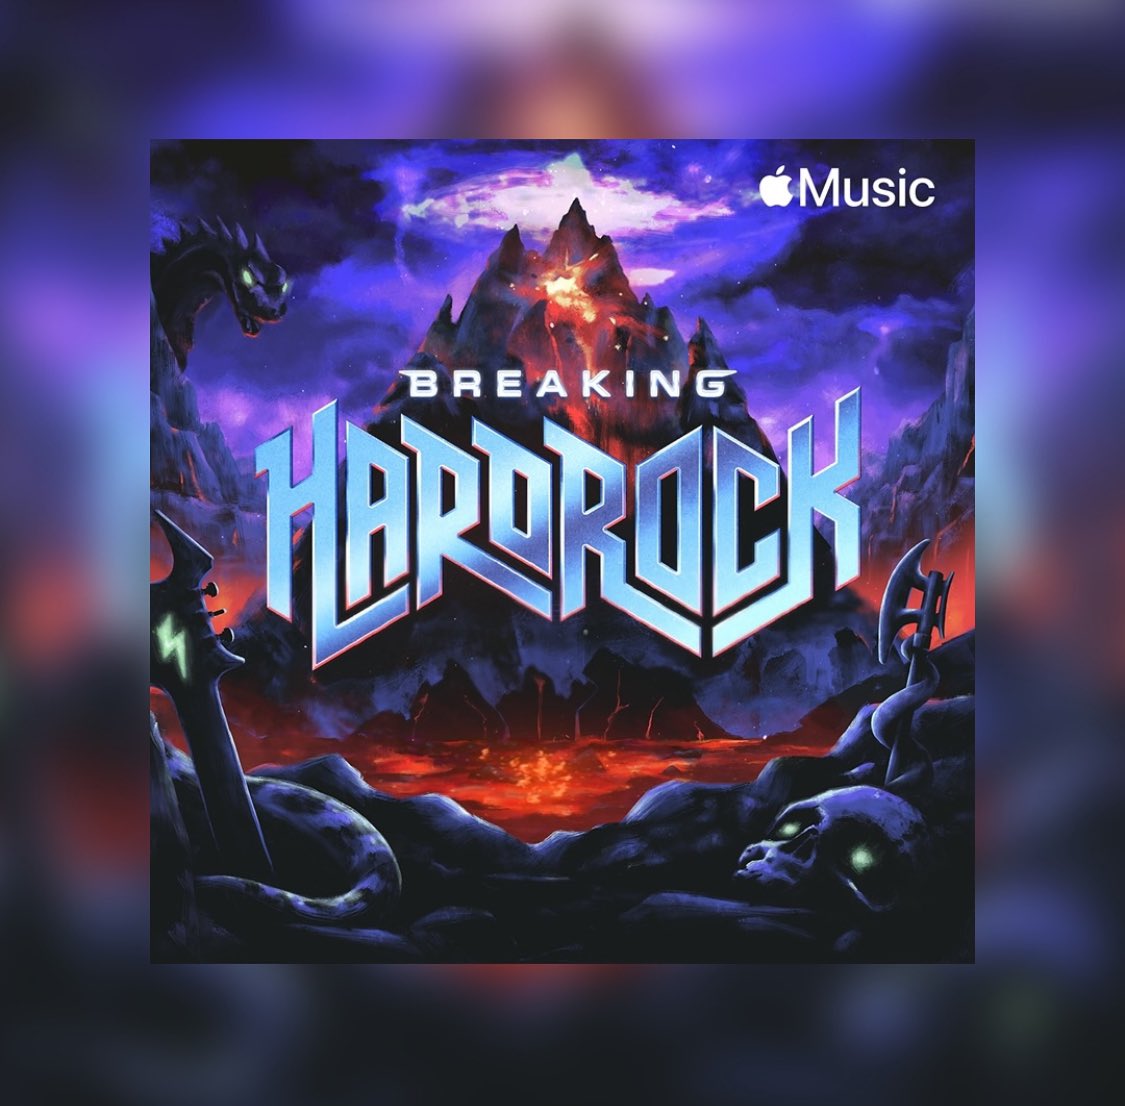 Thanks @applemusic for adding ‘Savages’ to their Breaking Hard Rock playlist. That’s a first for us! #Savages #TempletonPek #Playlist @judith_fisher @DontTryMusicUK @fleetunion